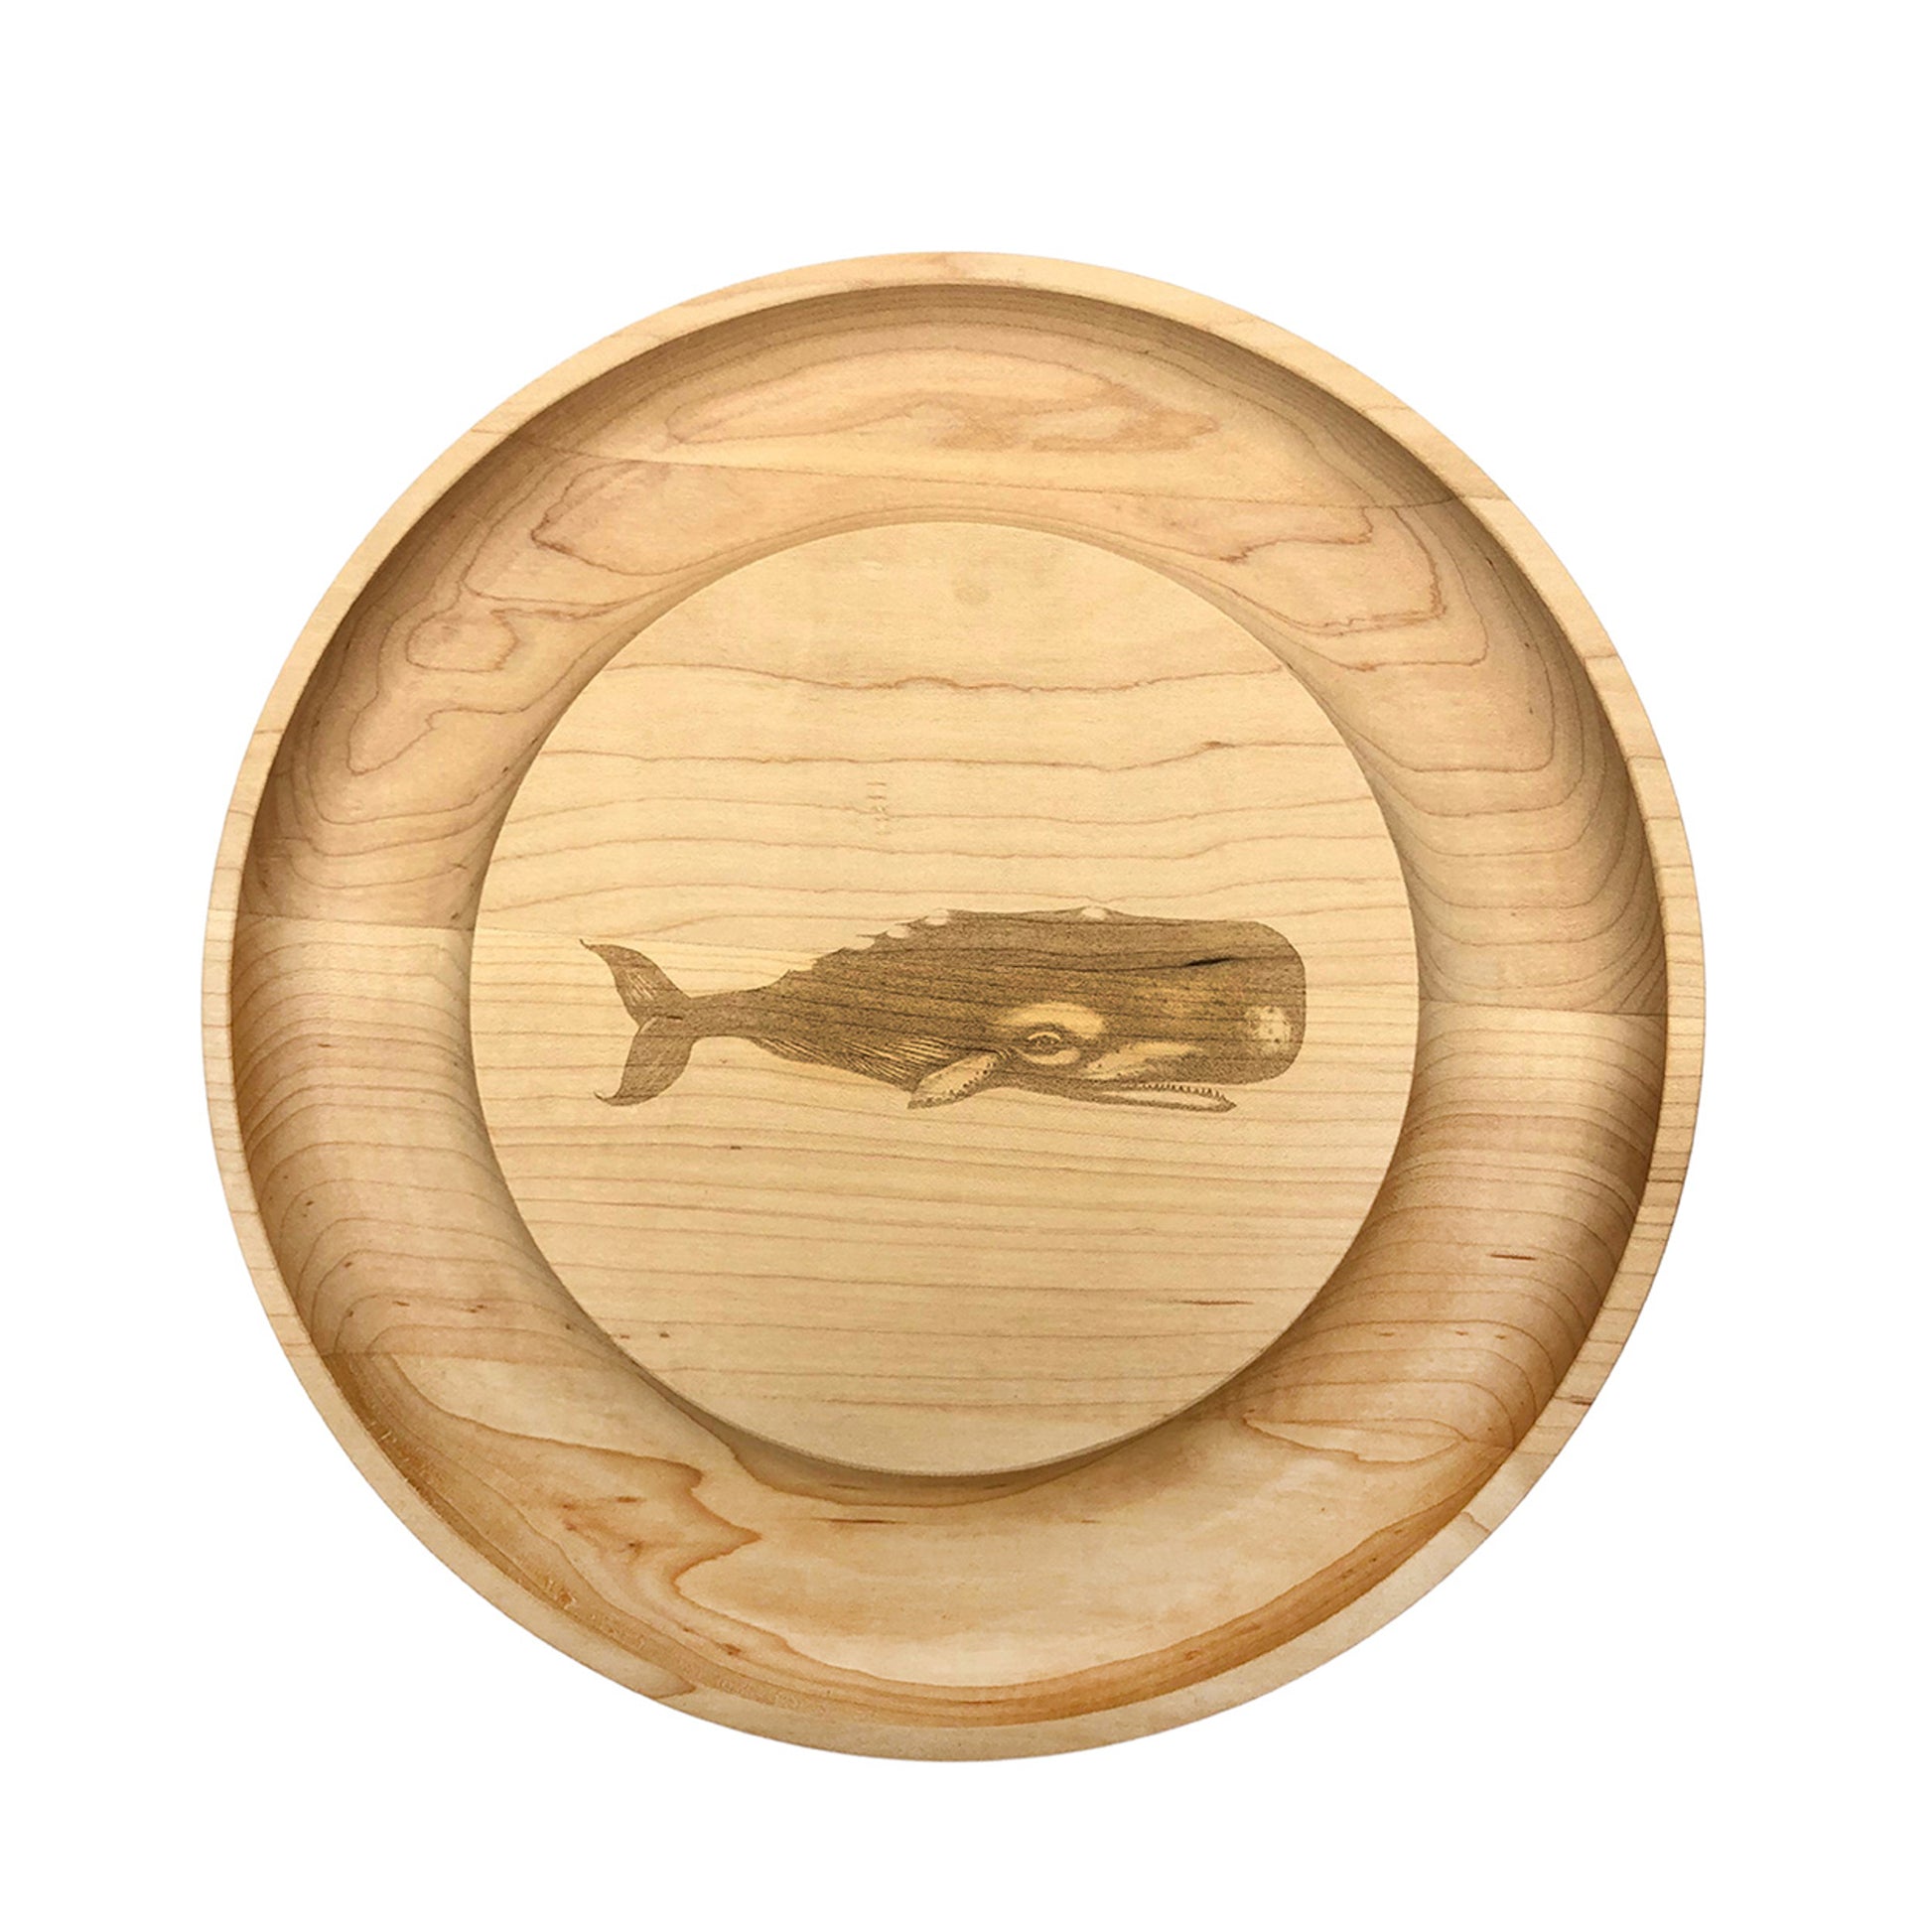 Laura Zindel Illustrations Maple Round Cheese Board - More designs available